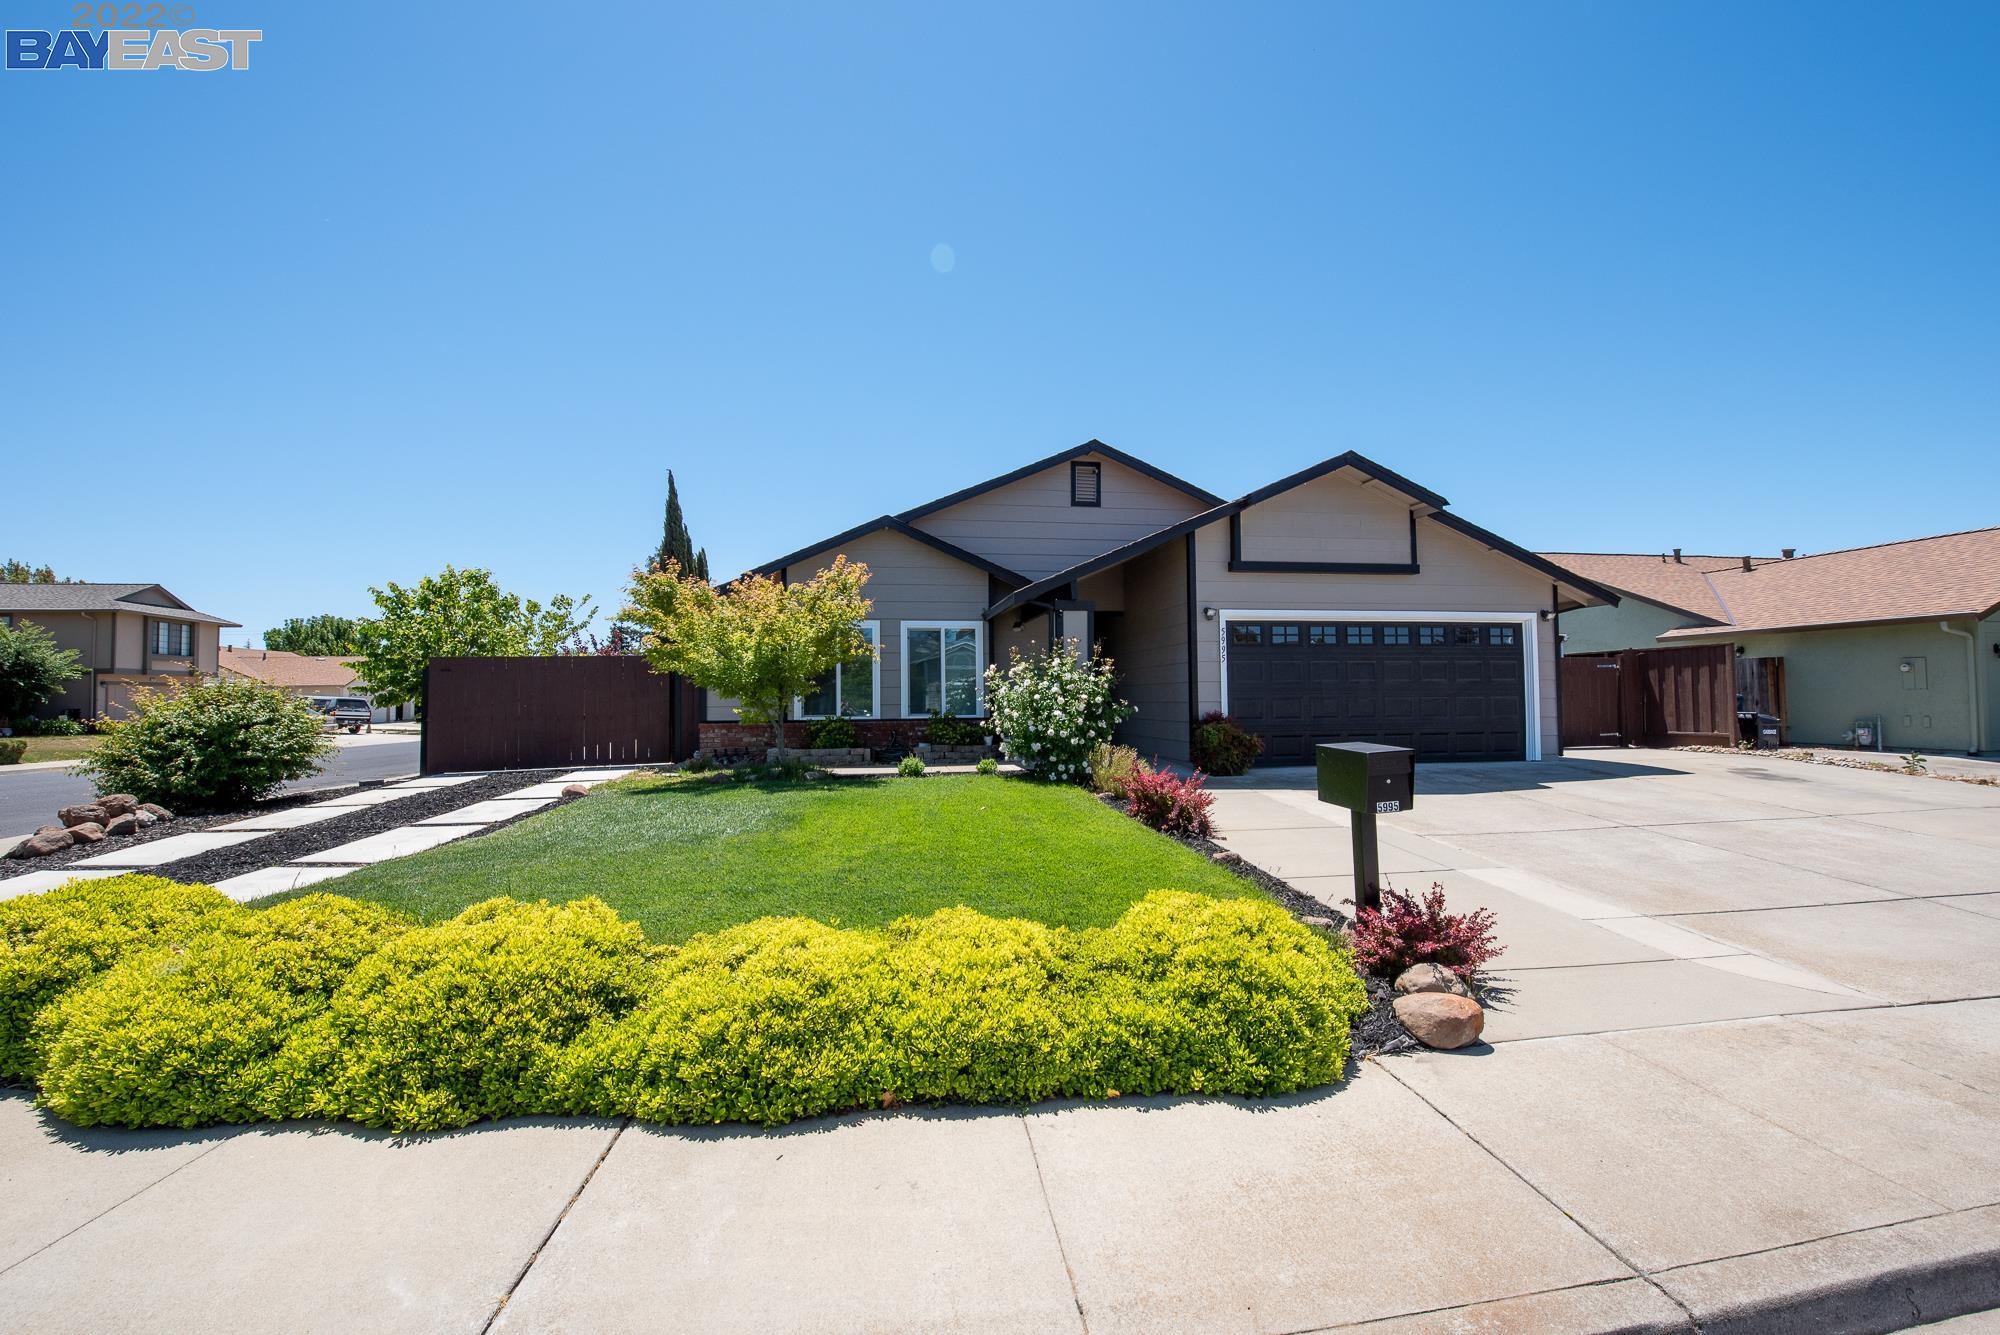 Detail Gallery Image 1 of 1 For 5995 Ocean Hills Way, Livermore,  CA 94551 - 3 Beds | 2 Baths